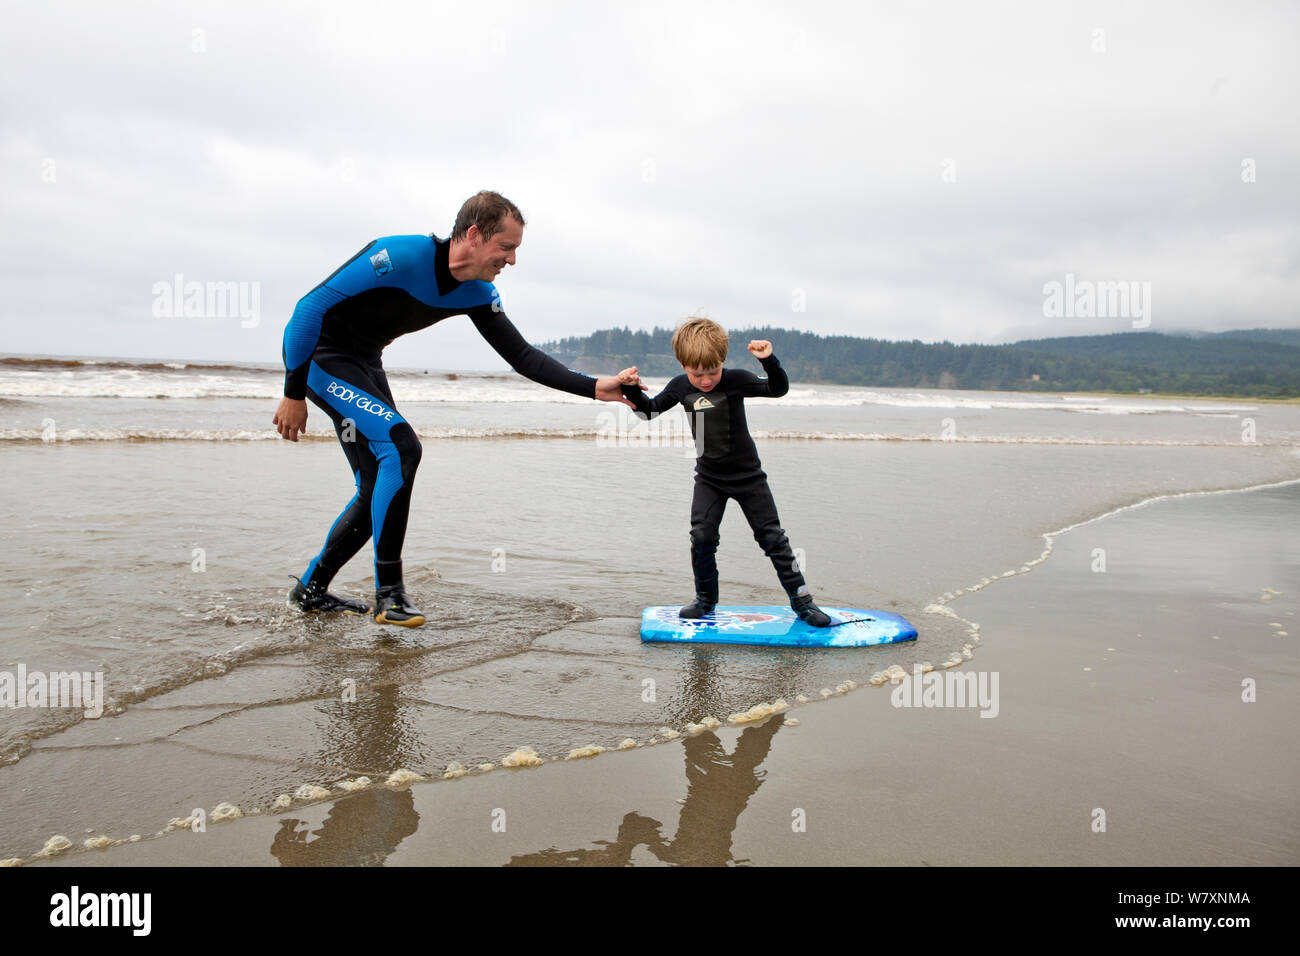 Nate Harrison teaching his son Gabriel how to surf, Hobuck Beach, Makah Reservation, Washington, USA, August 2014. Model Released. Model released. Stock Photo